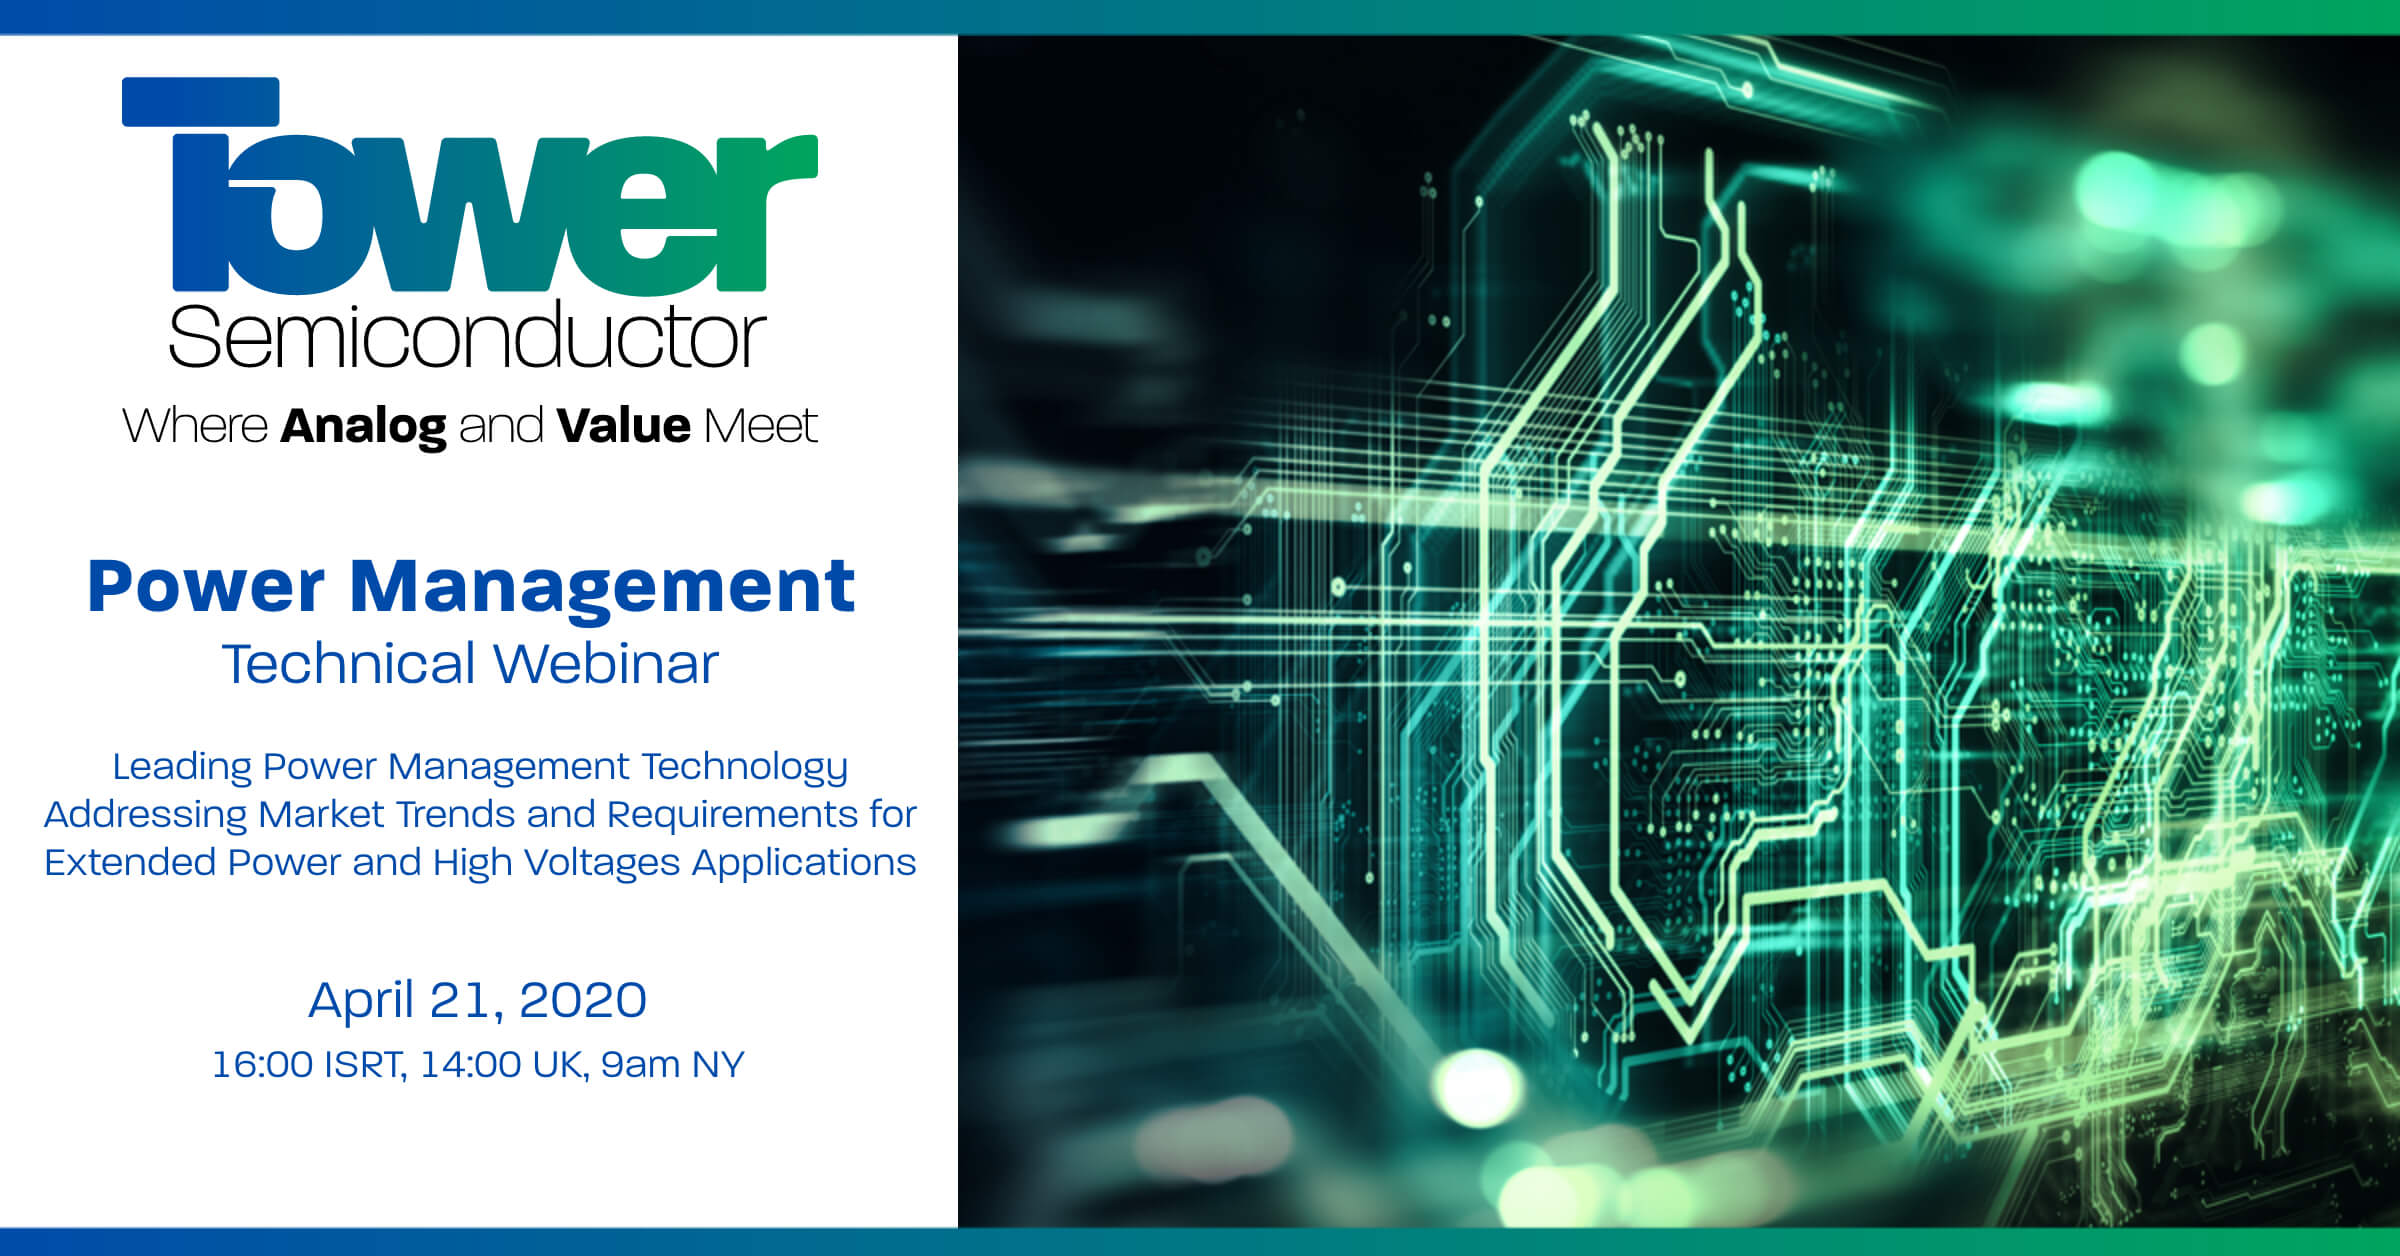 Tower Semiconductor to Hold an Online Webinar on Company’s Leading Power Management Technology Addressing Market Trends and Requirements for Extended Power and High Voltage Applications